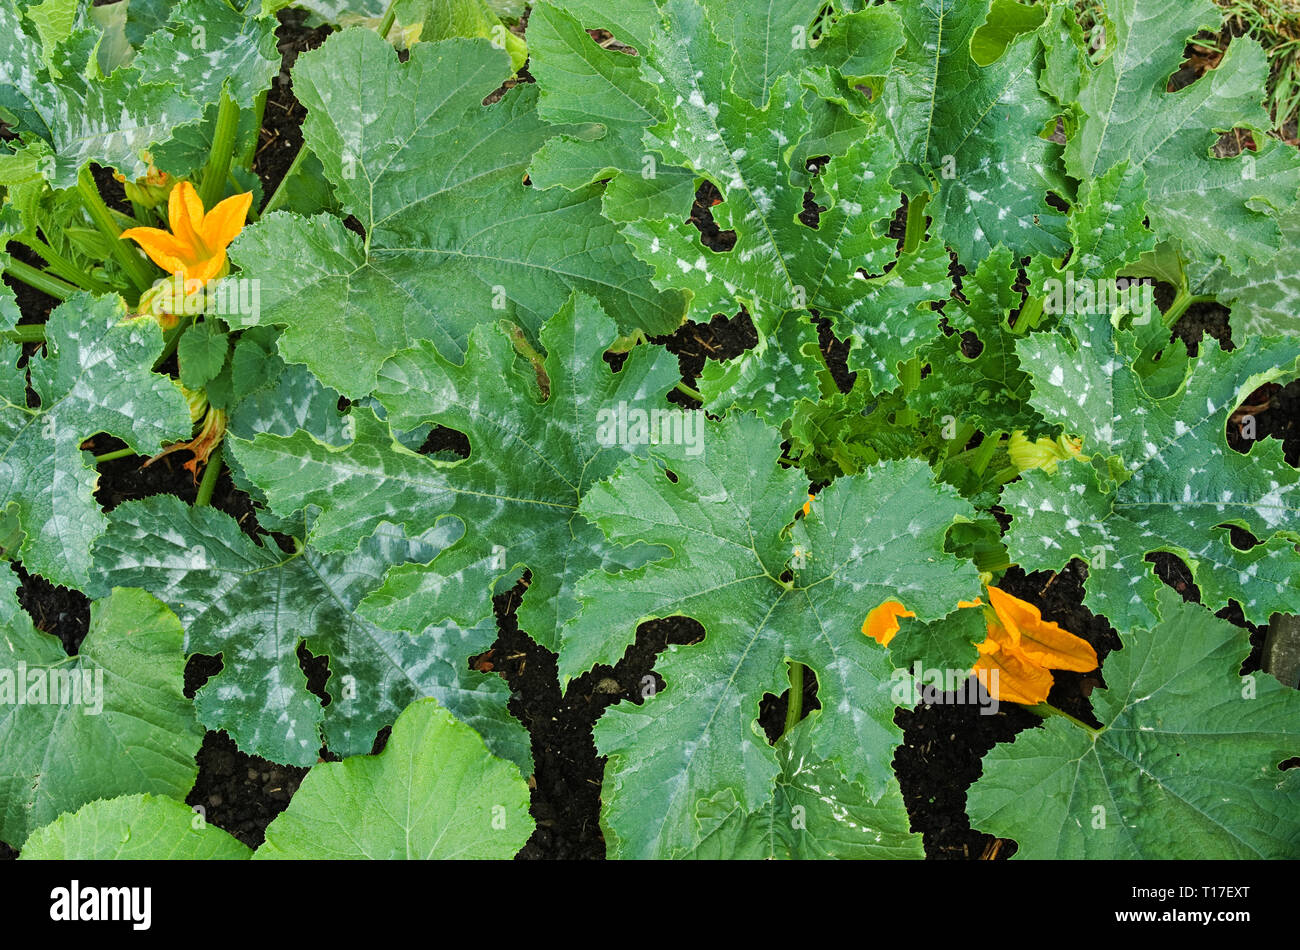 Close-up overhead view of yellow flowers and mottled green foliage on courgette plants variety F1 Defender growing in English vegetable garden, summer Stock Photo